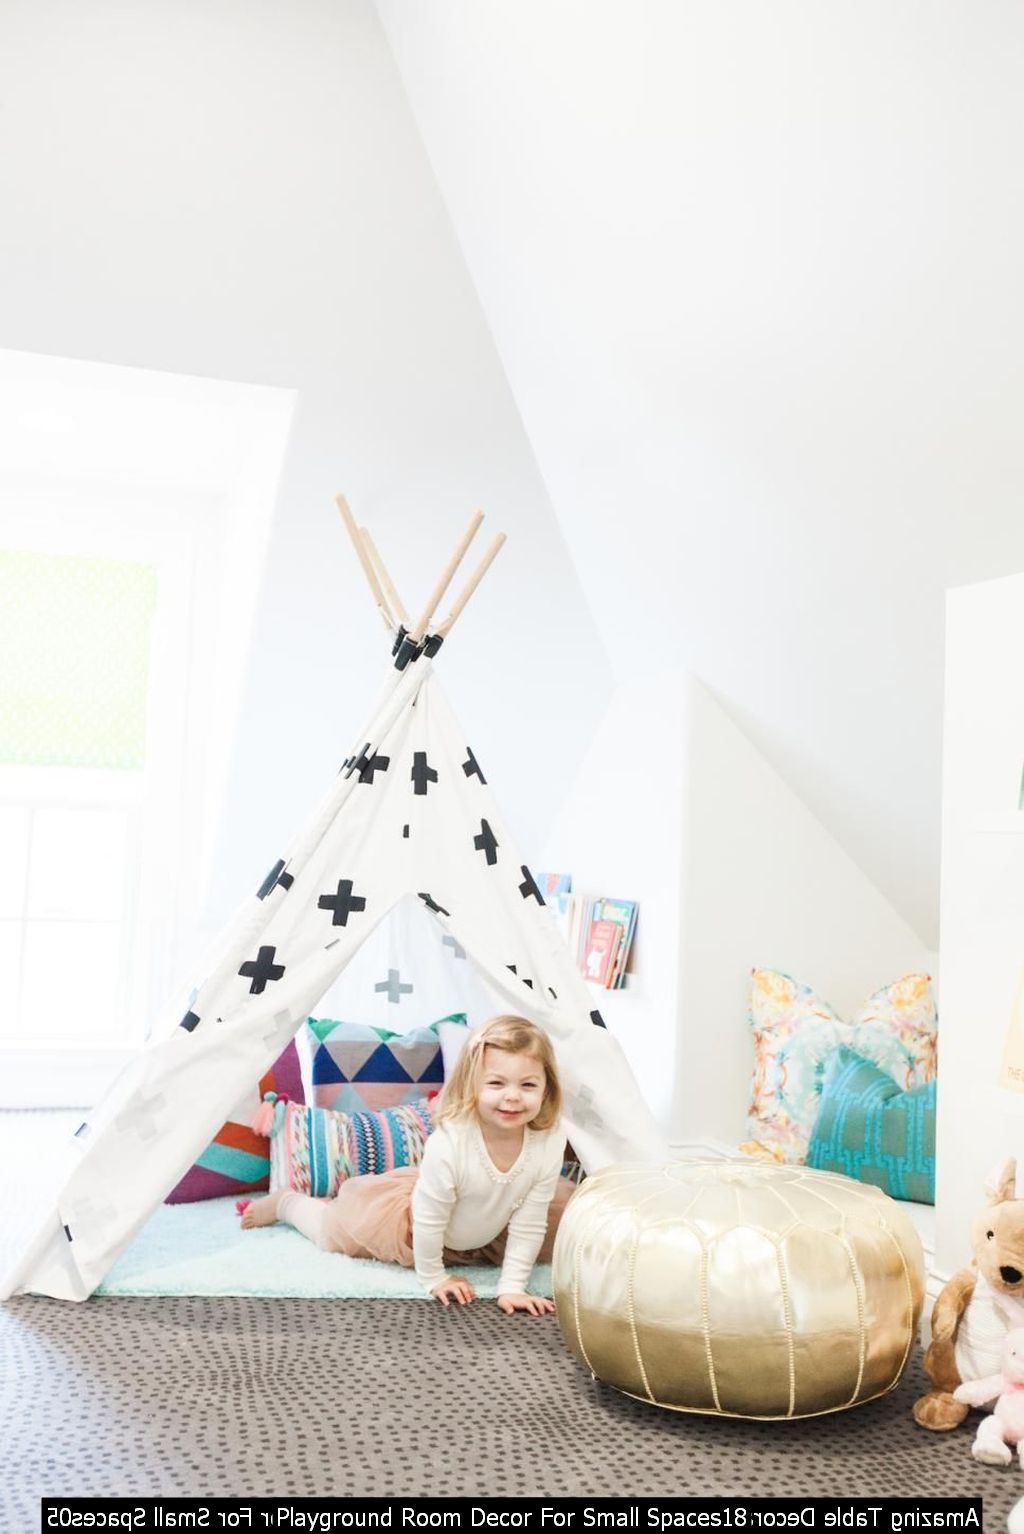 Playground Room Decor For Small Spaces18